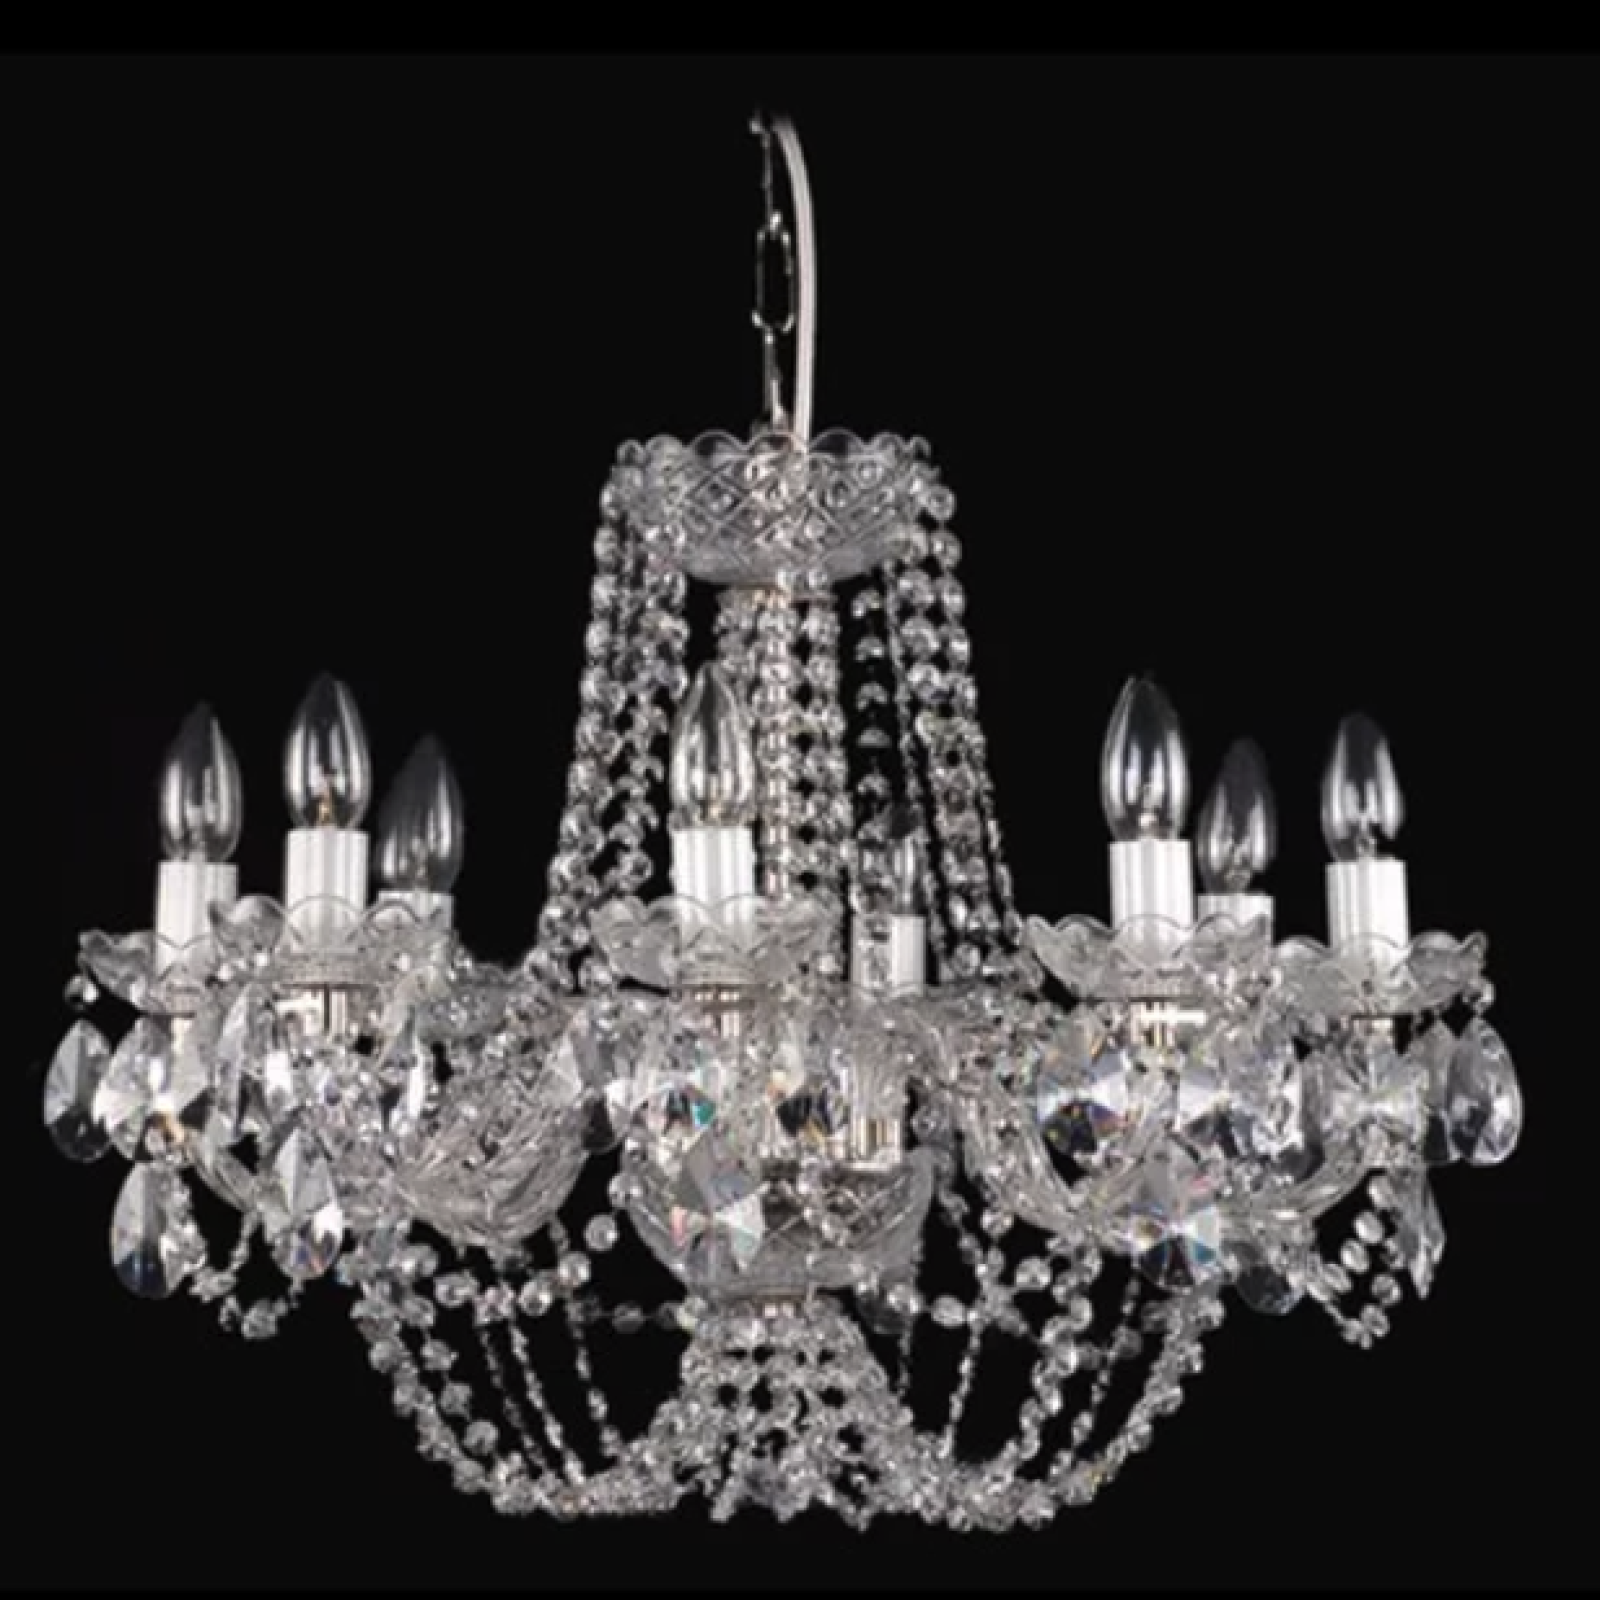 Very traditional 8 arm chandelier